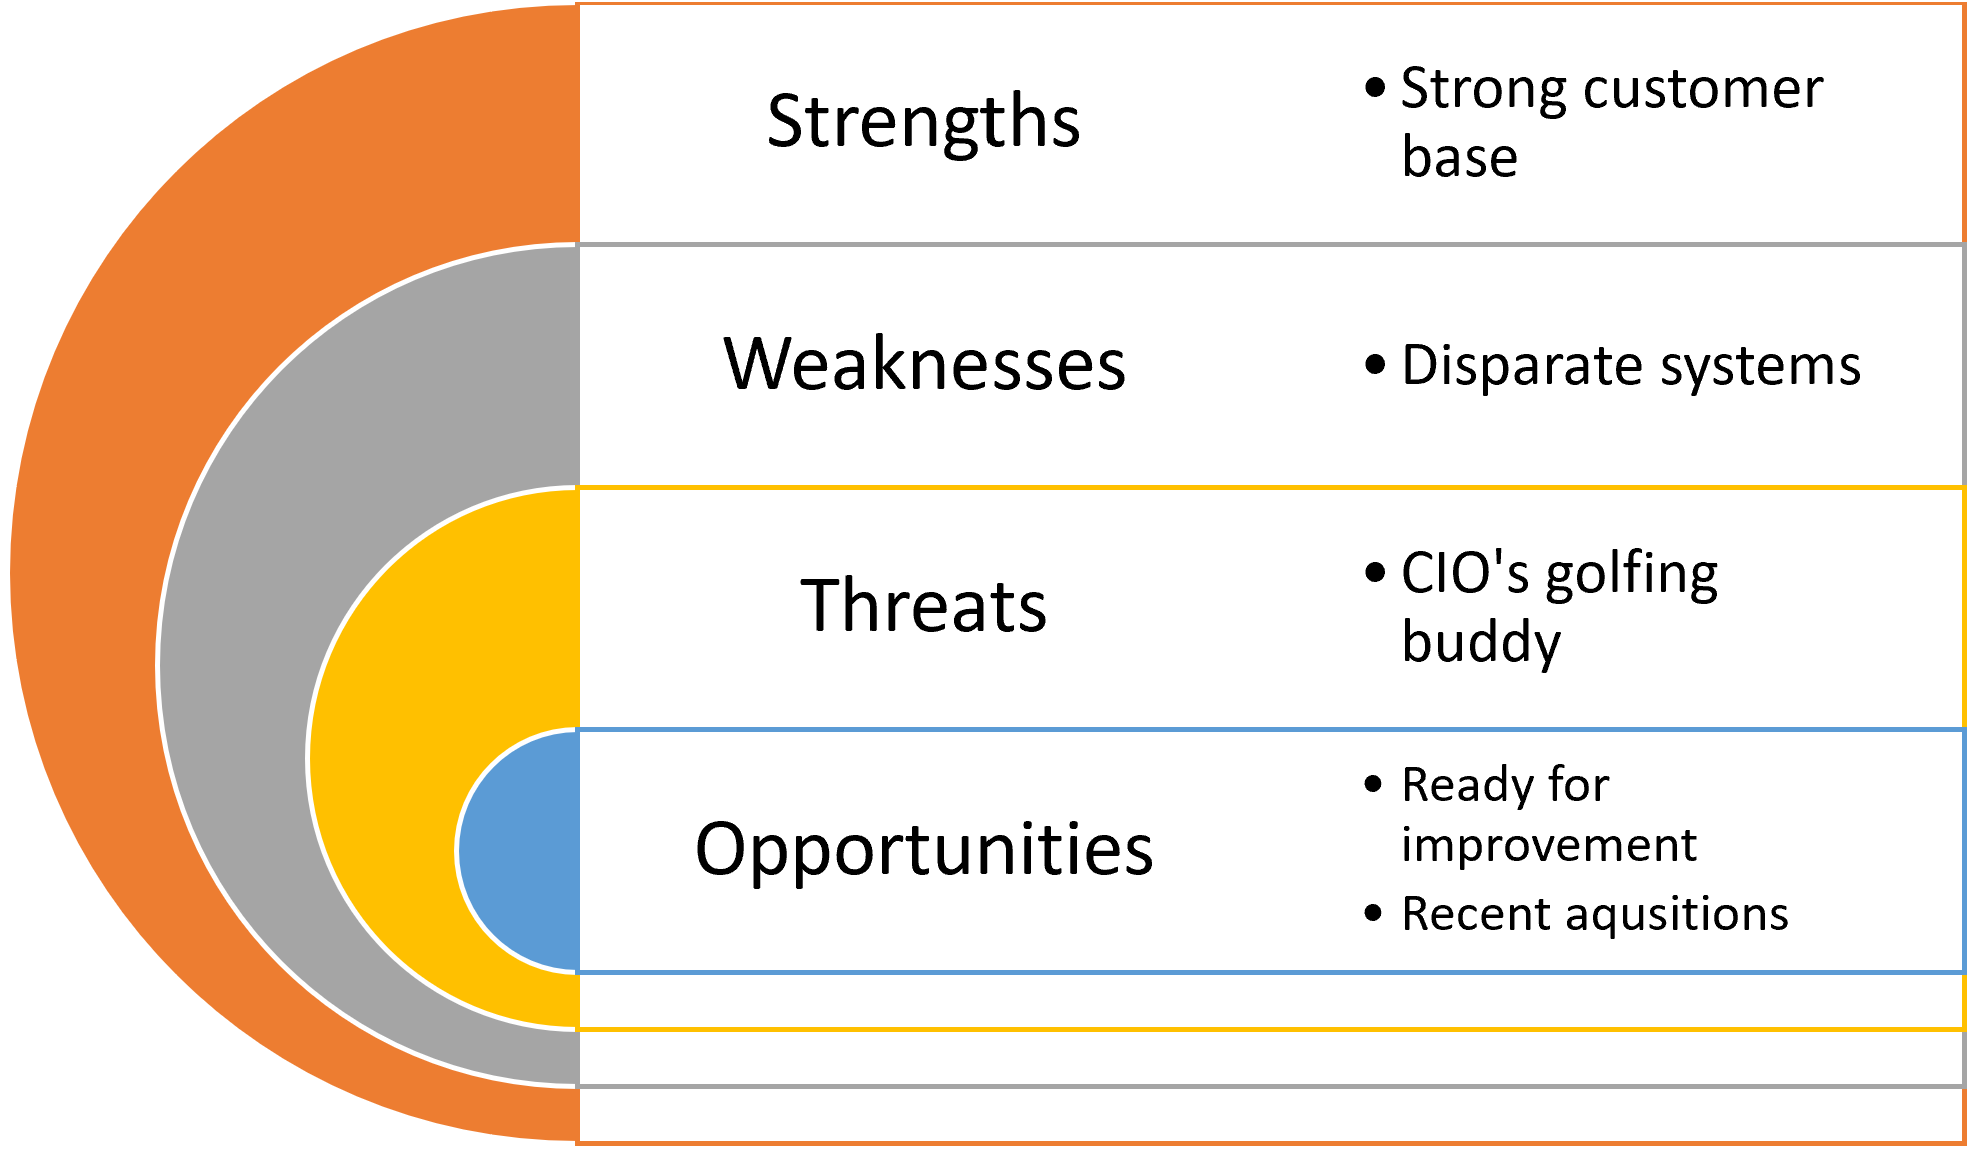 SWOT analysis showing Strengths (Strong customer base), Weaknesses (Disparate systems), Threats (CIO's golfing buddy), and Opportunities (Ready for improvement, Recent aquisitions).